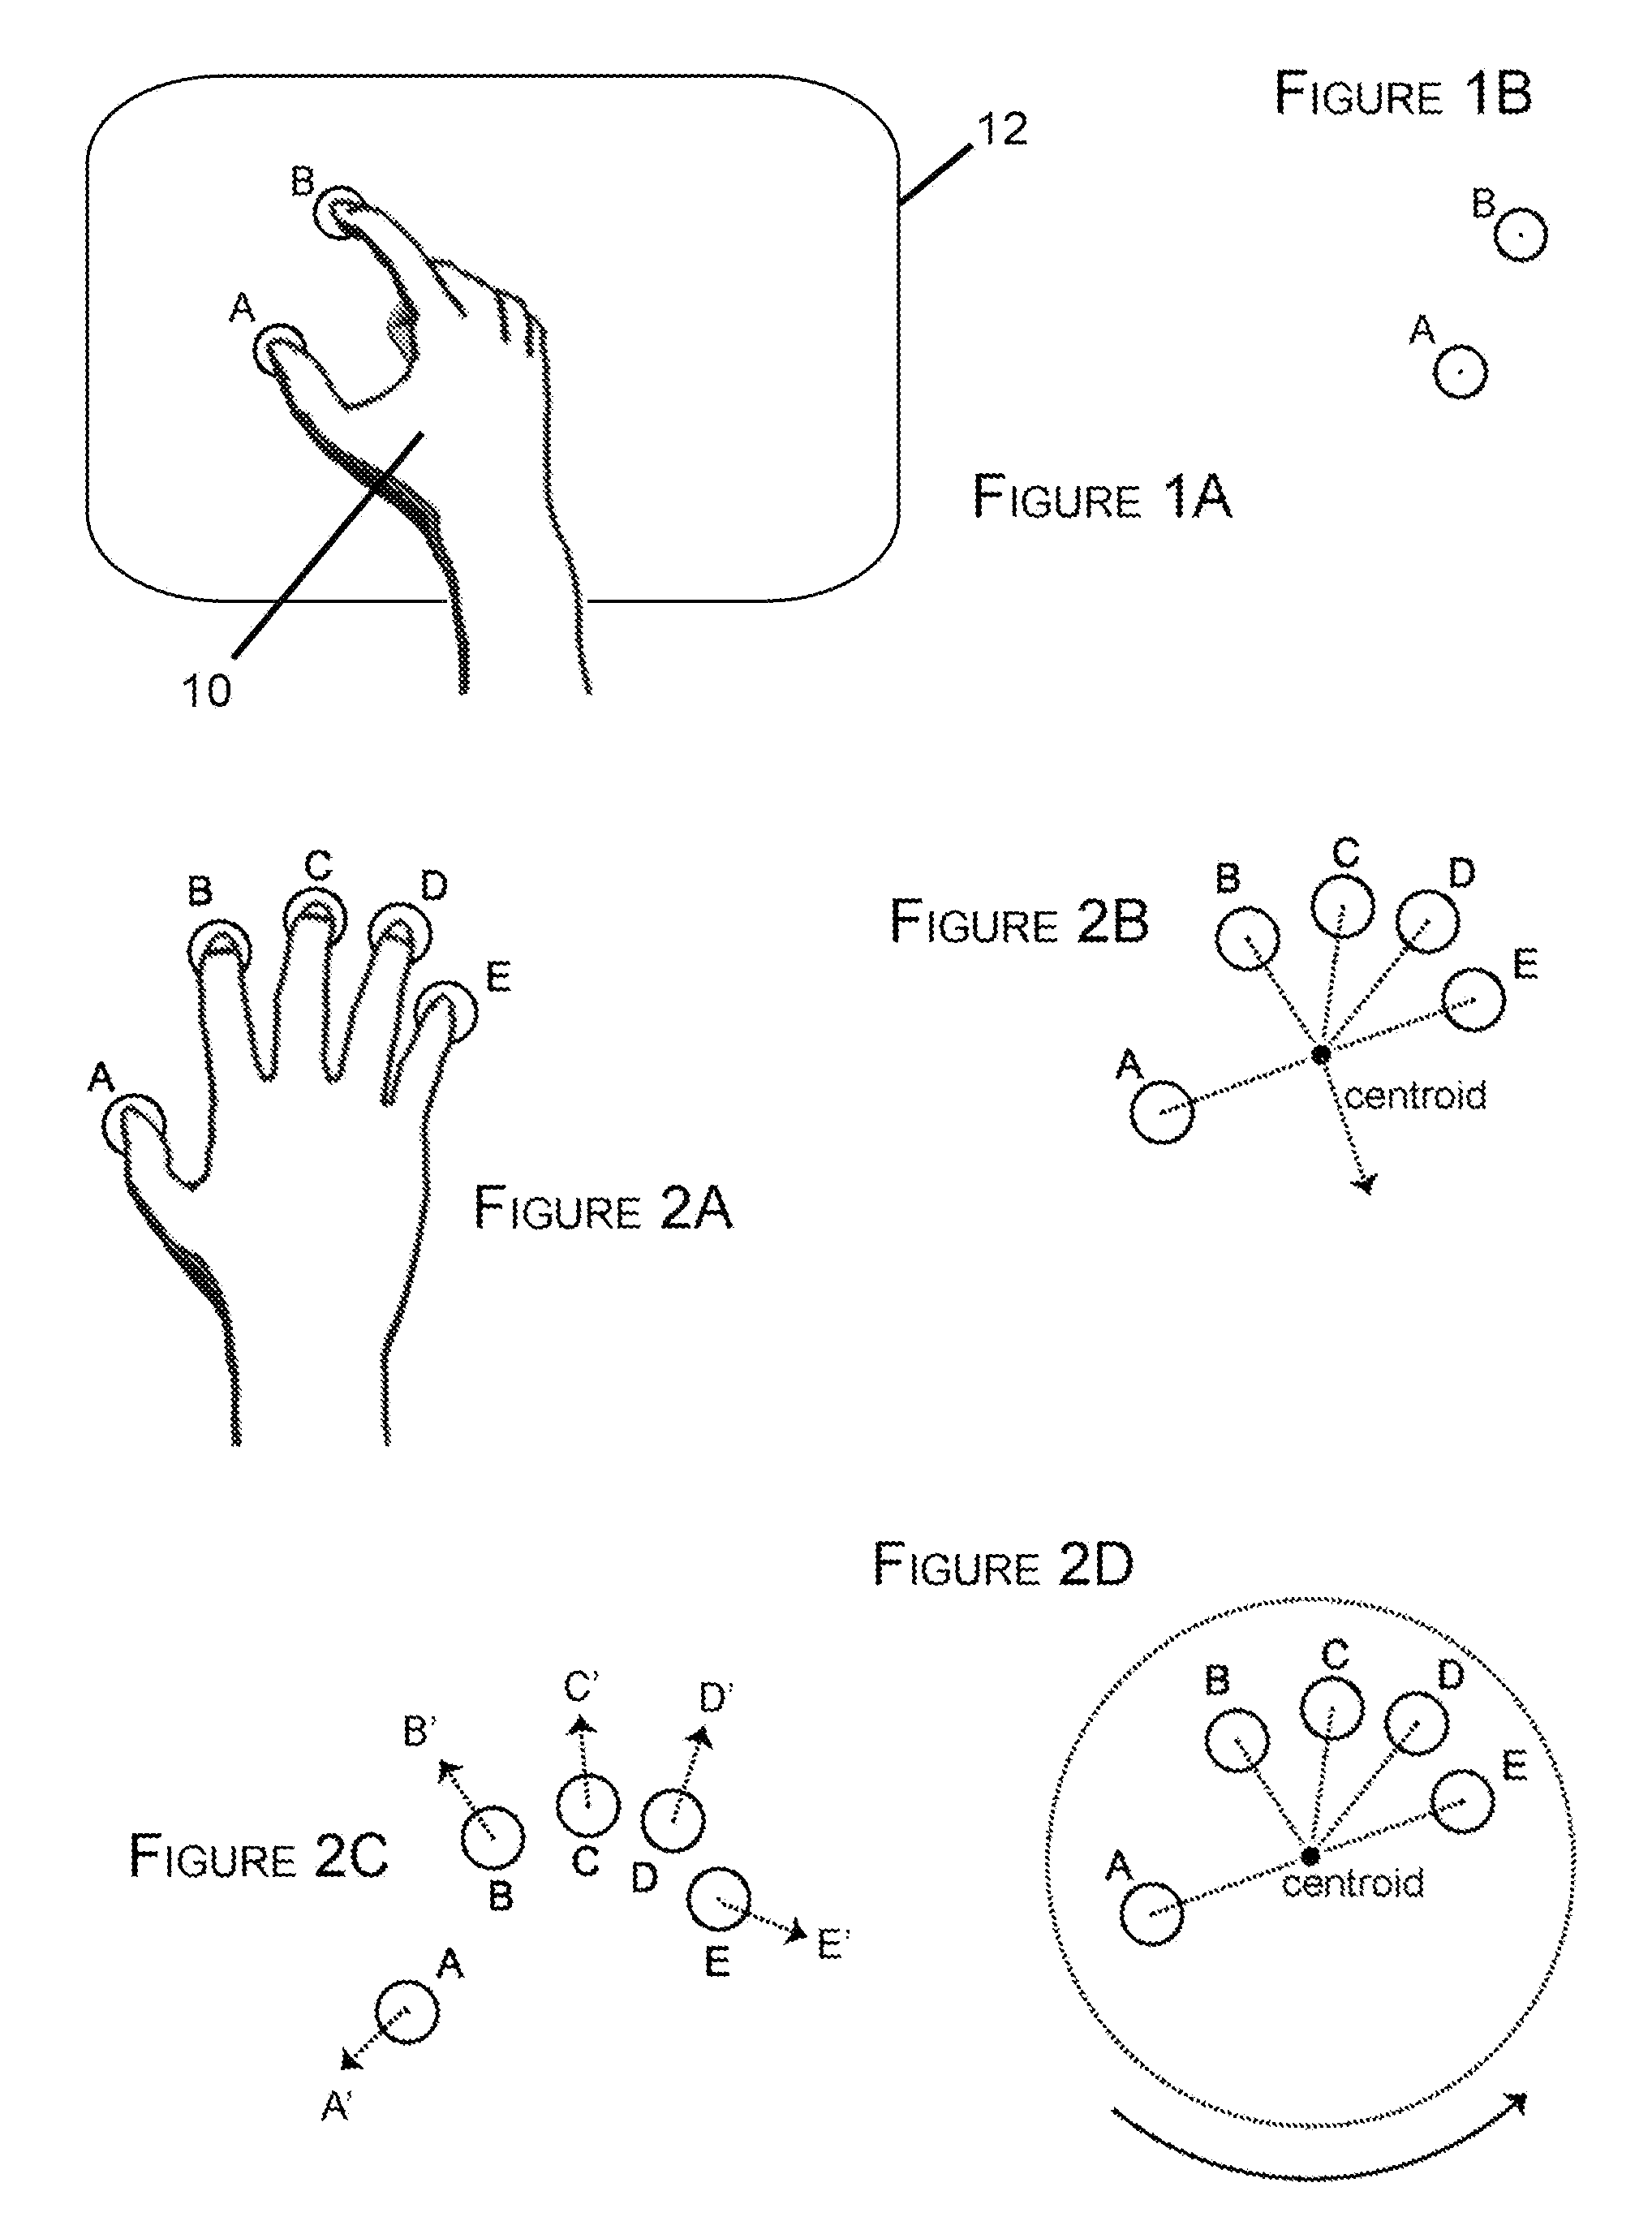 Methods of interfacing with multi-point input devices and multi-point input systems employing interfacing techniques